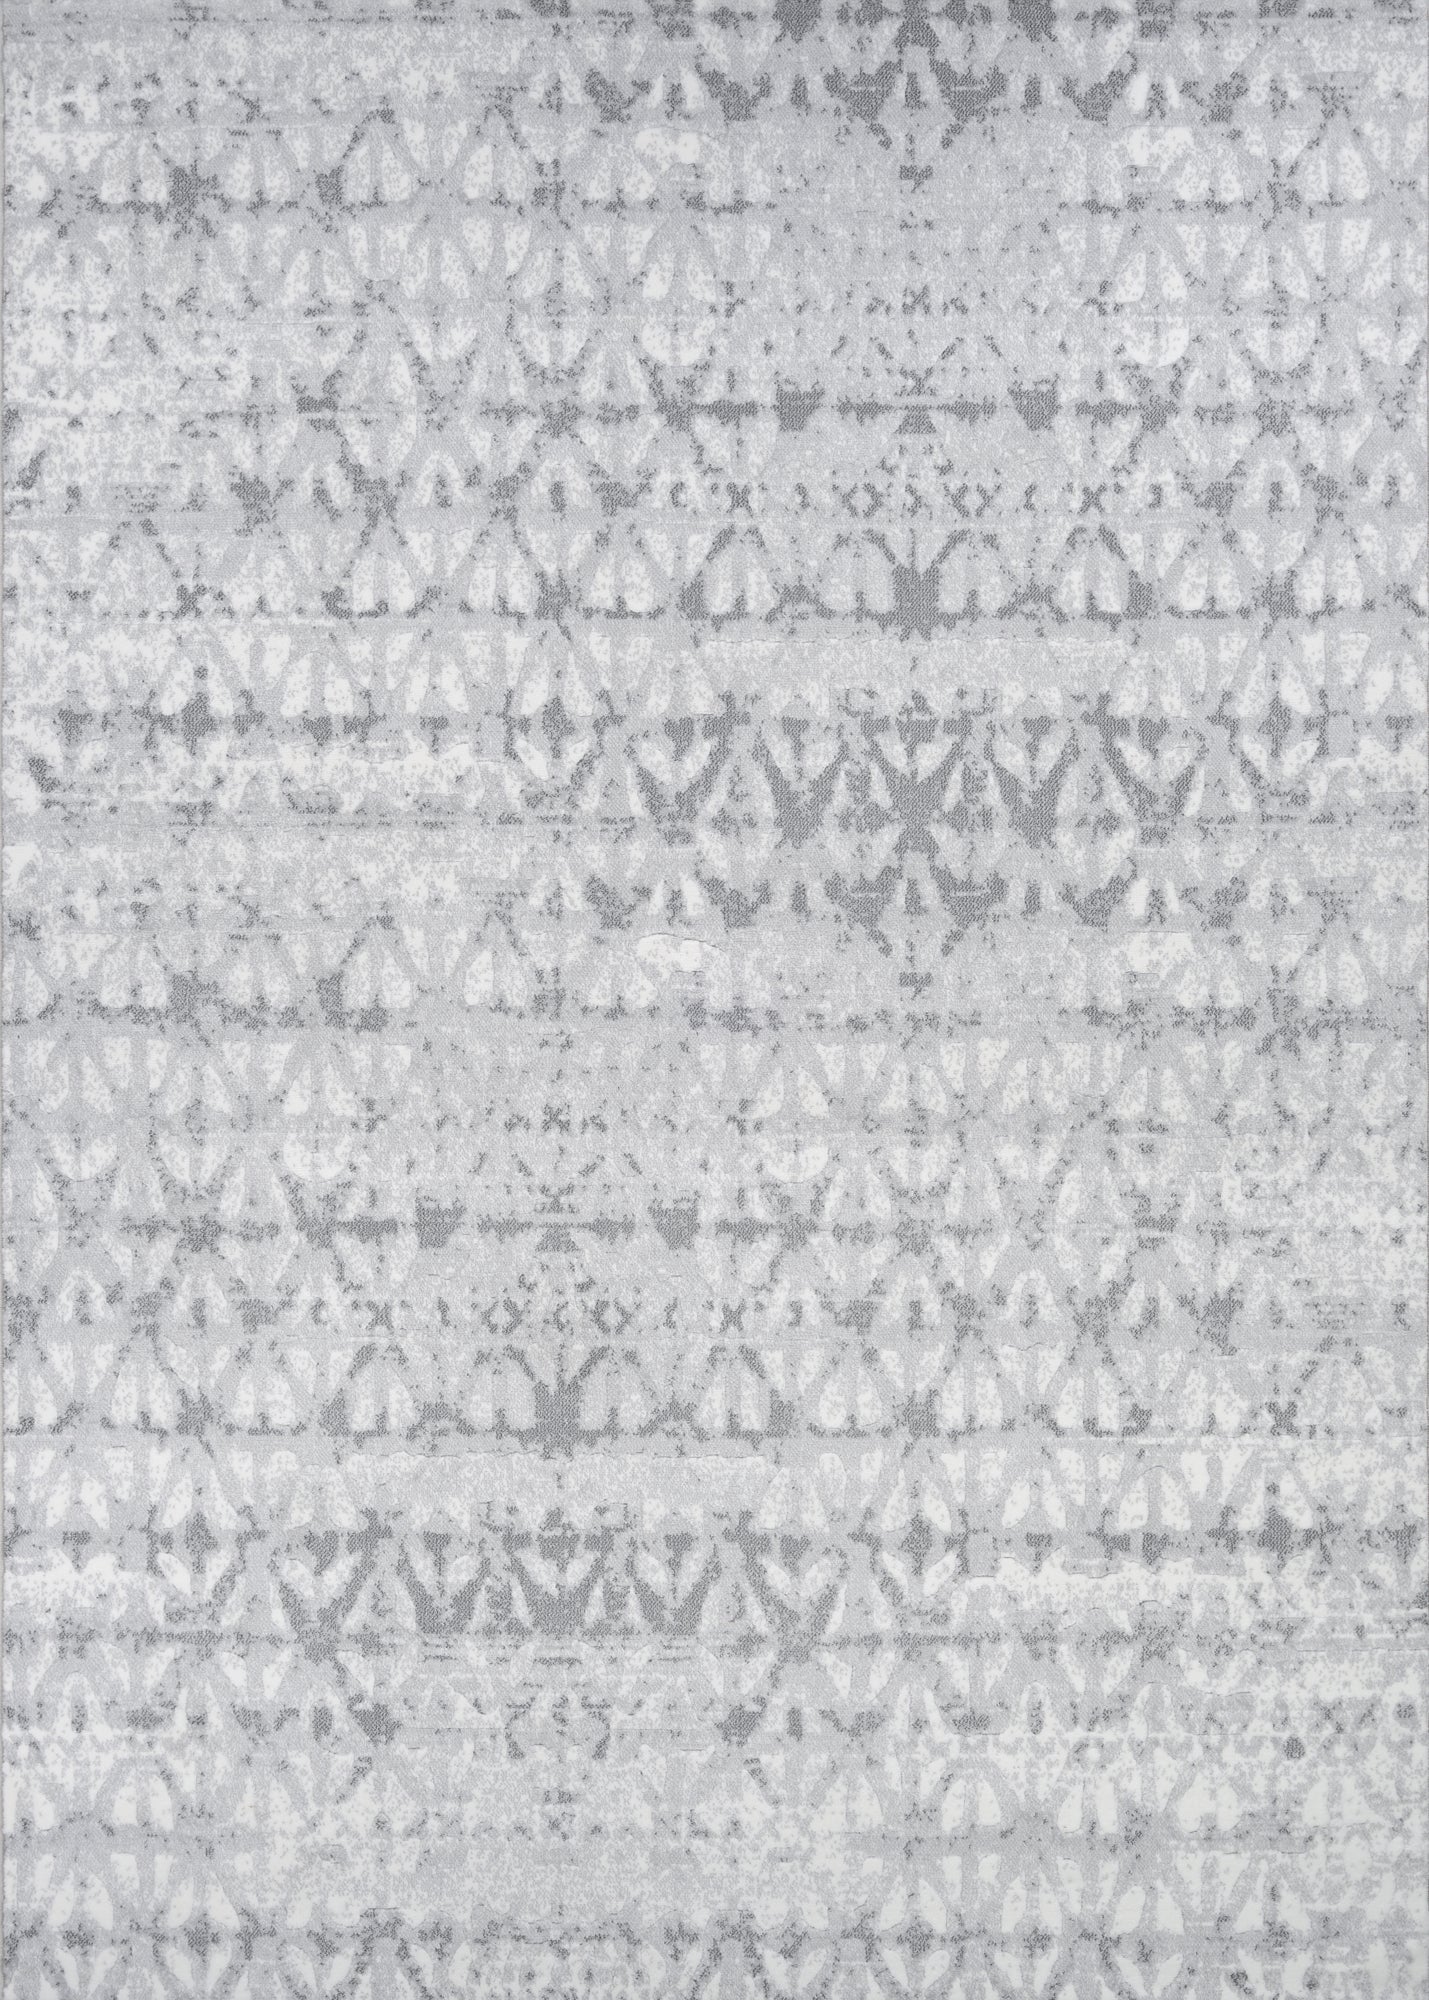 Couristan Marina Grisaille Pearl/Champagne Area Rug main image